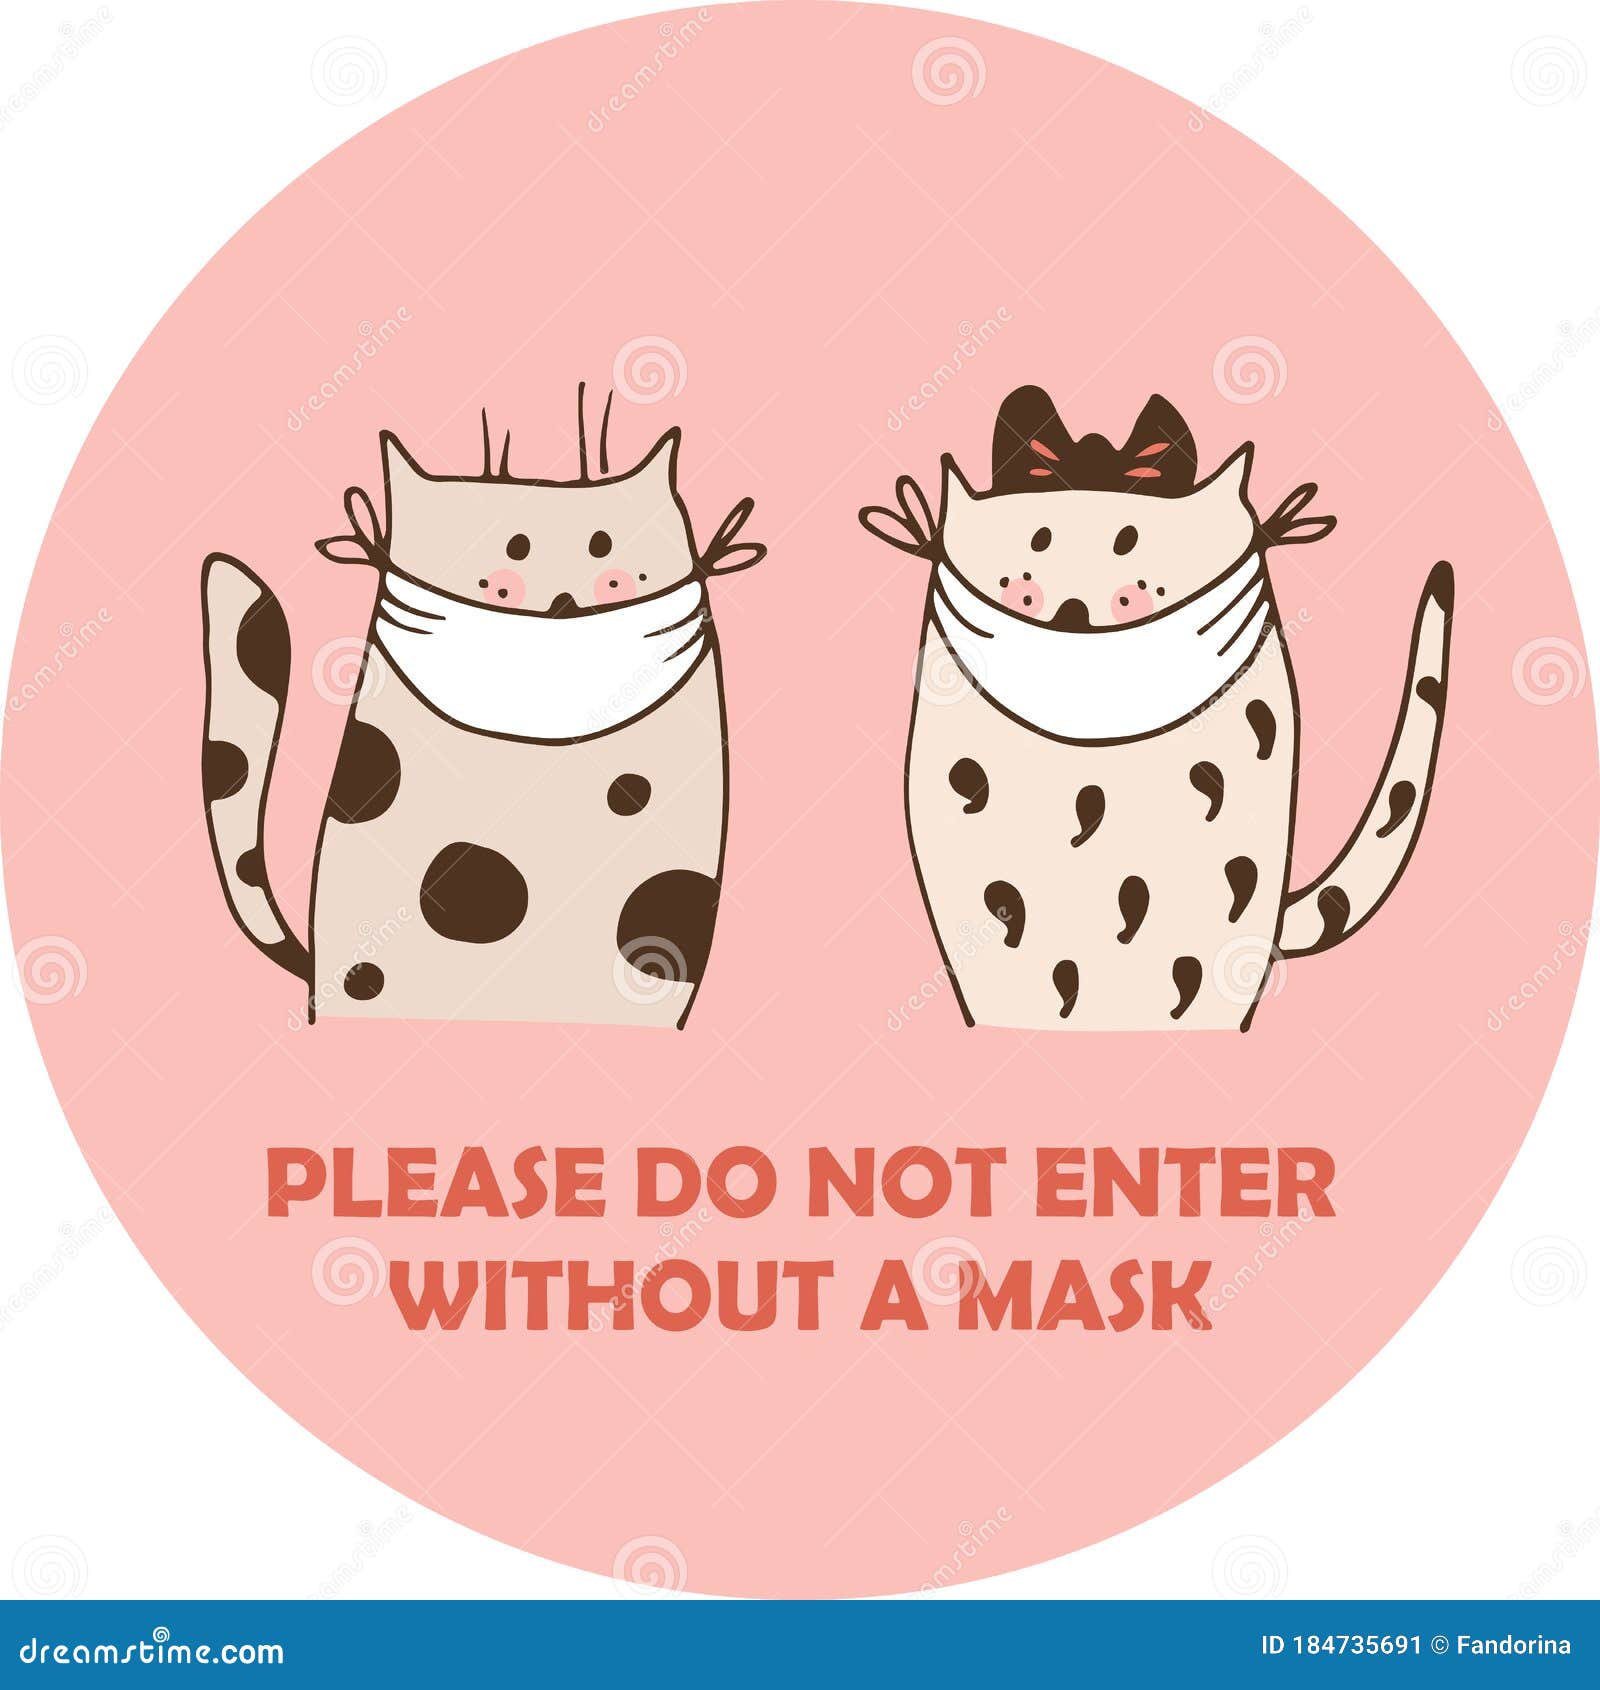 Two Cats In Face Masks Vector Illustration With Text Please Do Not Enter Without A Mask Stock Vector Illustration Of Animal Coronavirus